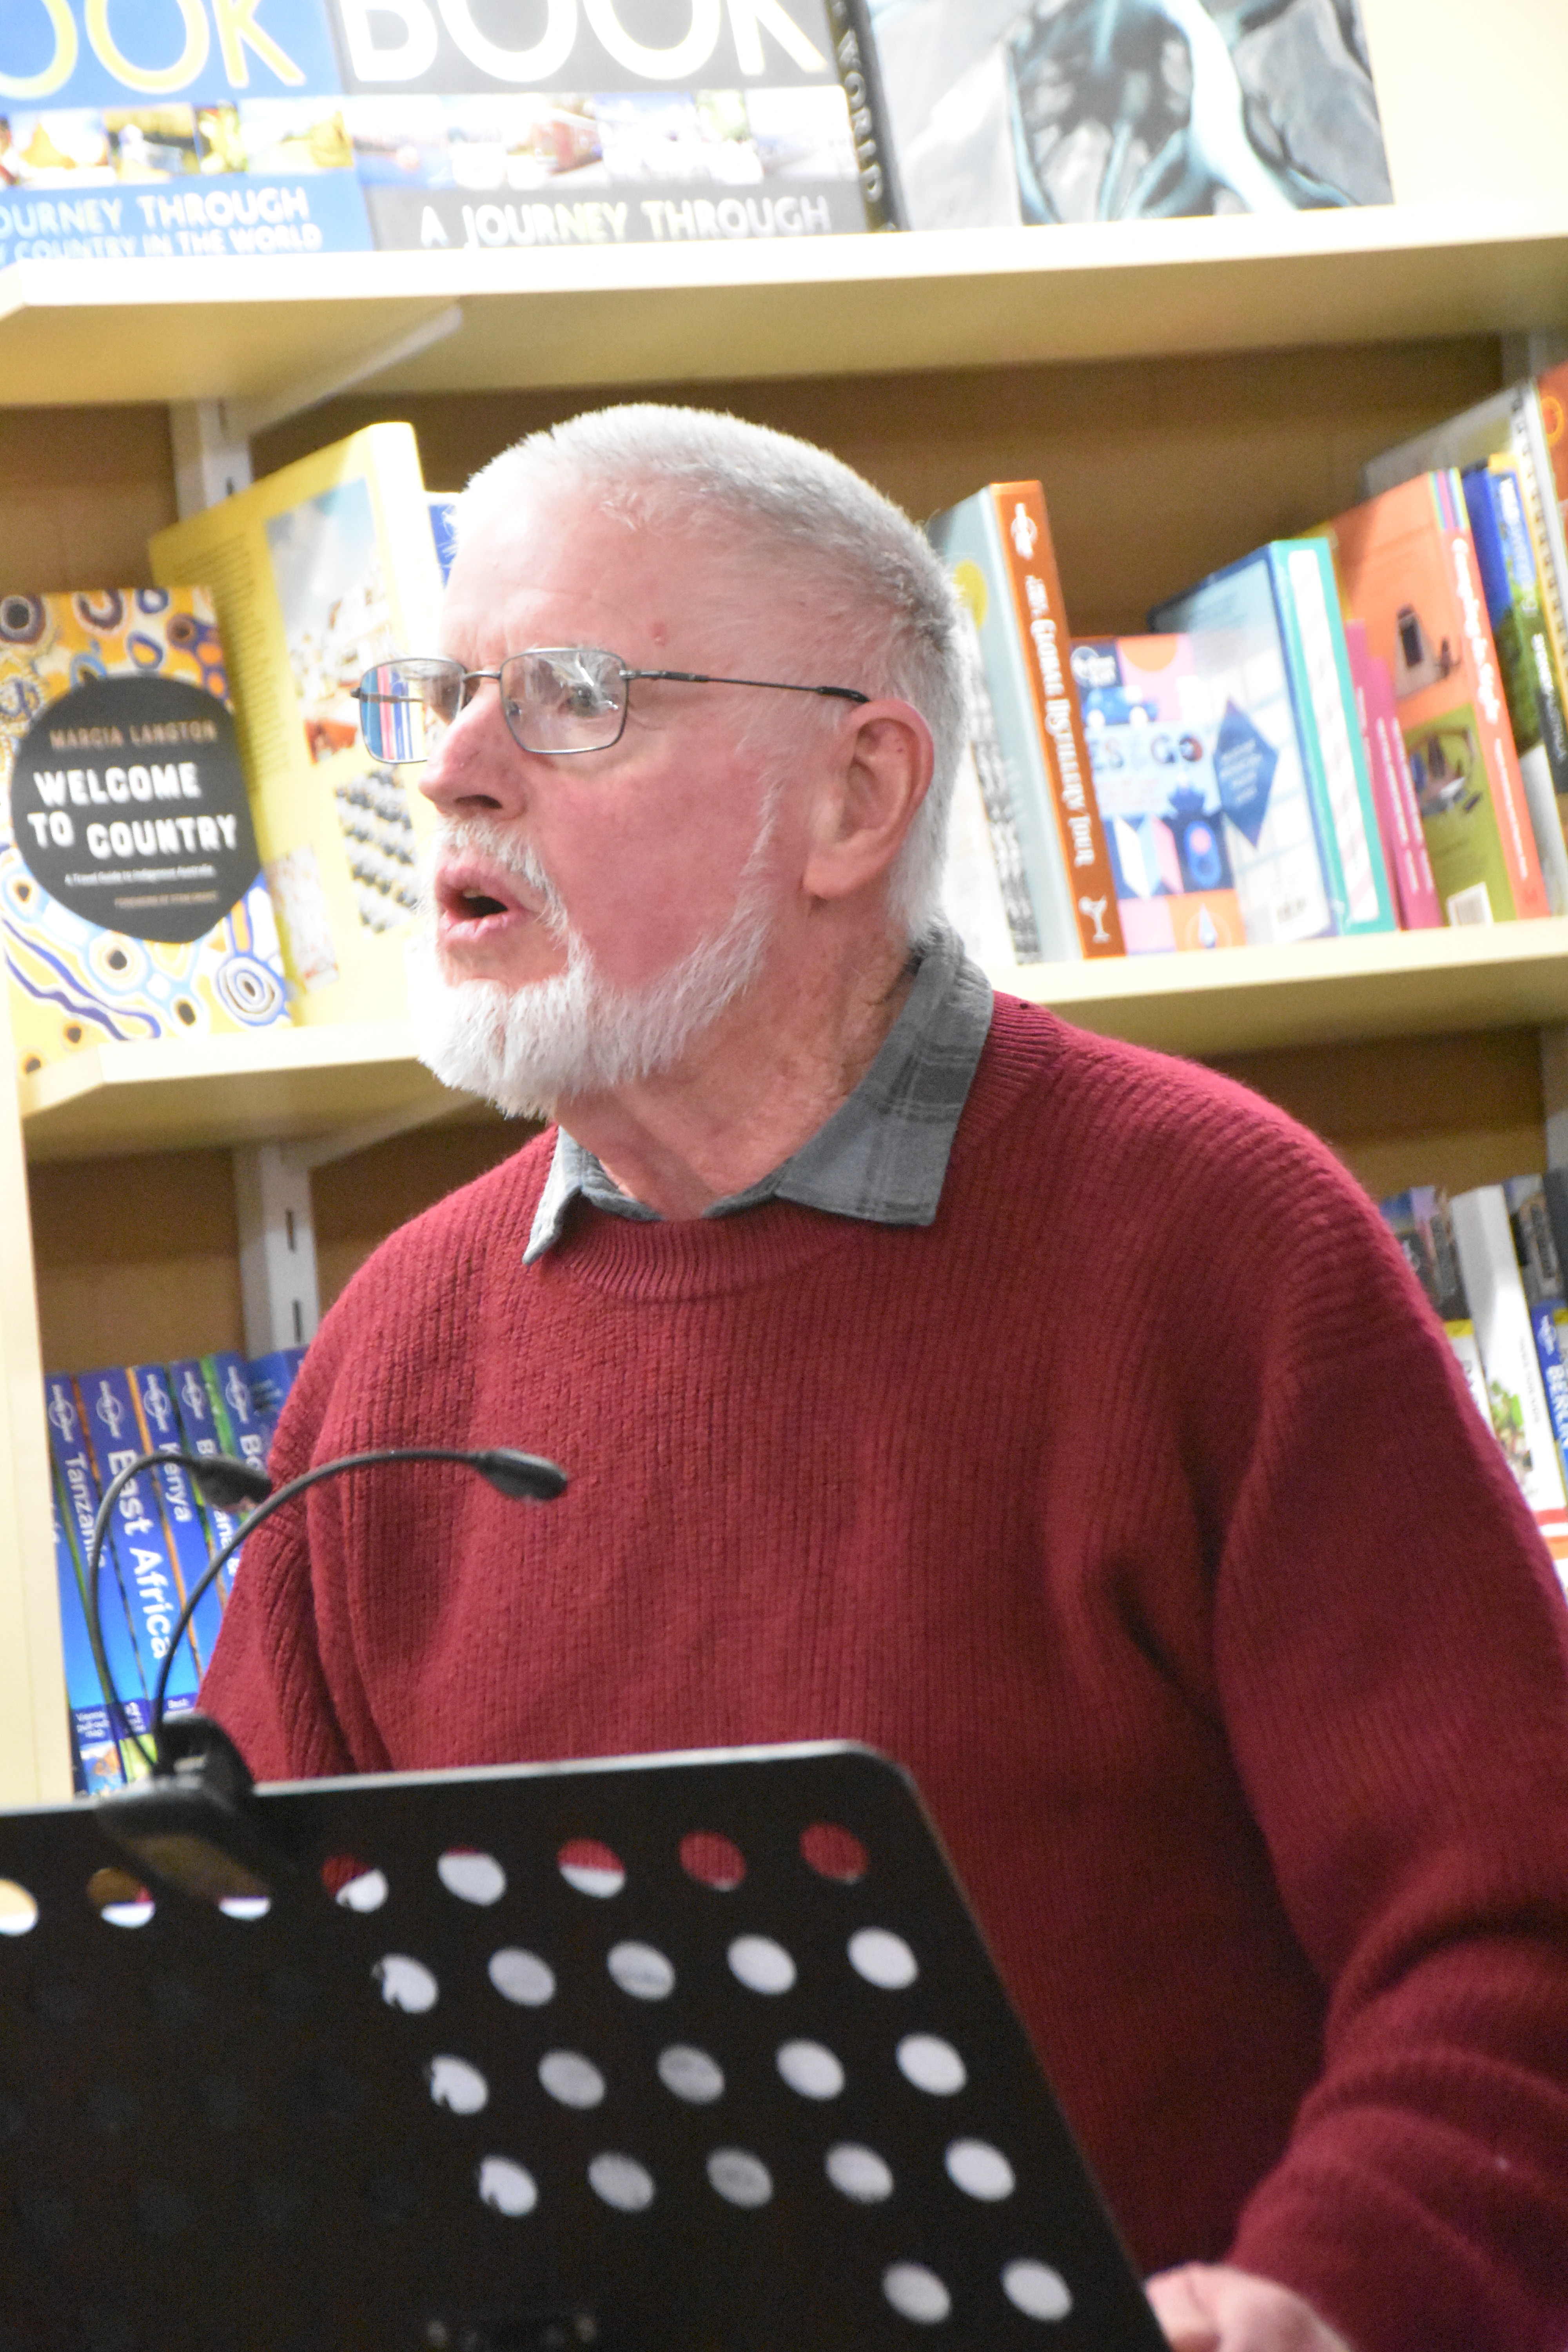 Chris Cunningham, the Author of Climate Change and the Cargo Cult Attended a Book Launch Event Organized by Reader’s Companion Bookstore 